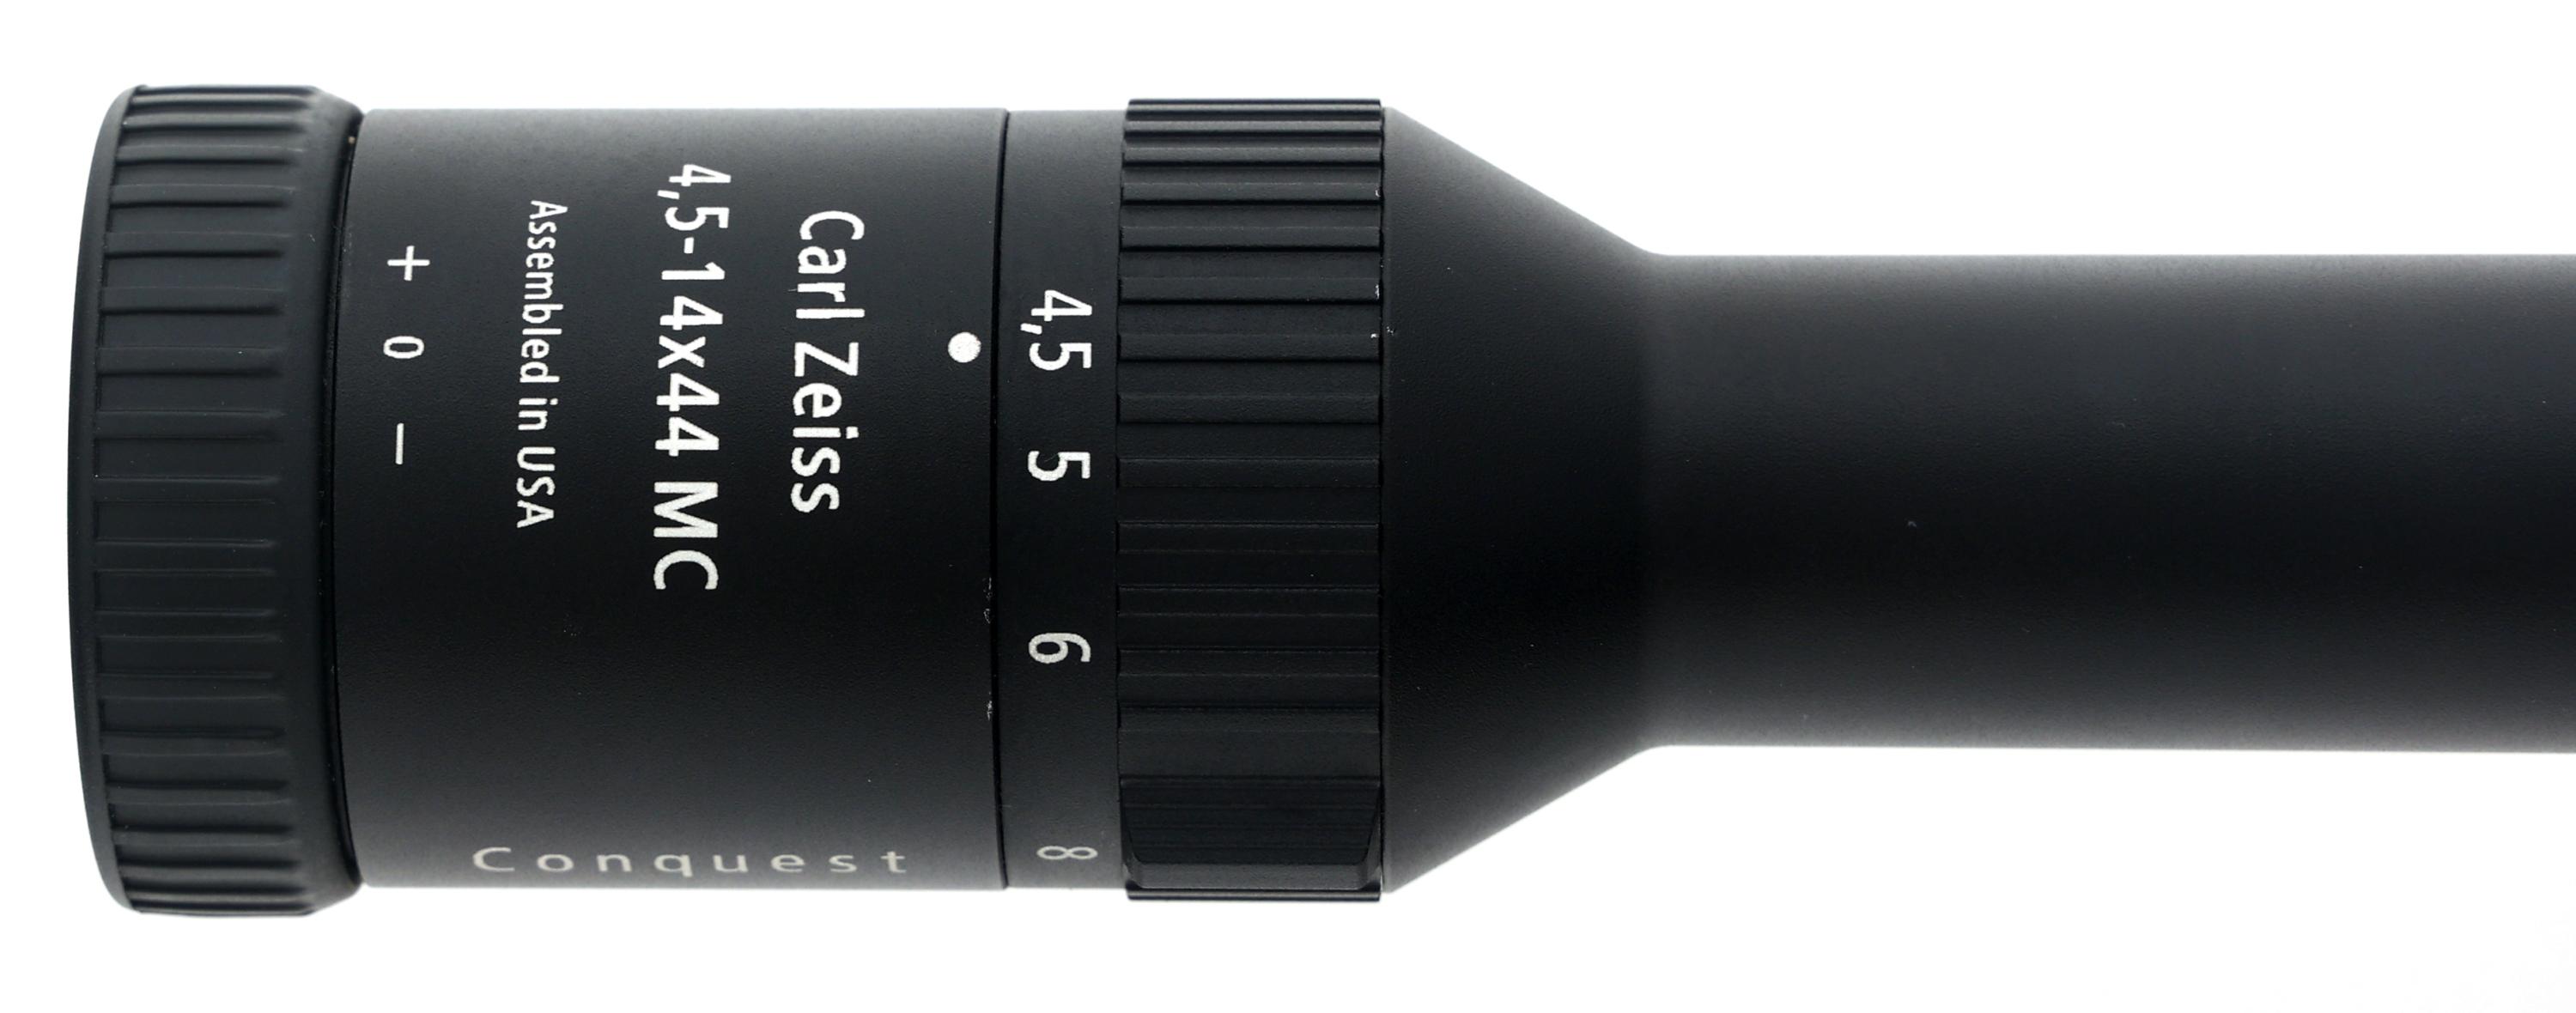 CARL ZEISS CONQUEST 4.5-14x44mm RIFLE SCOPE